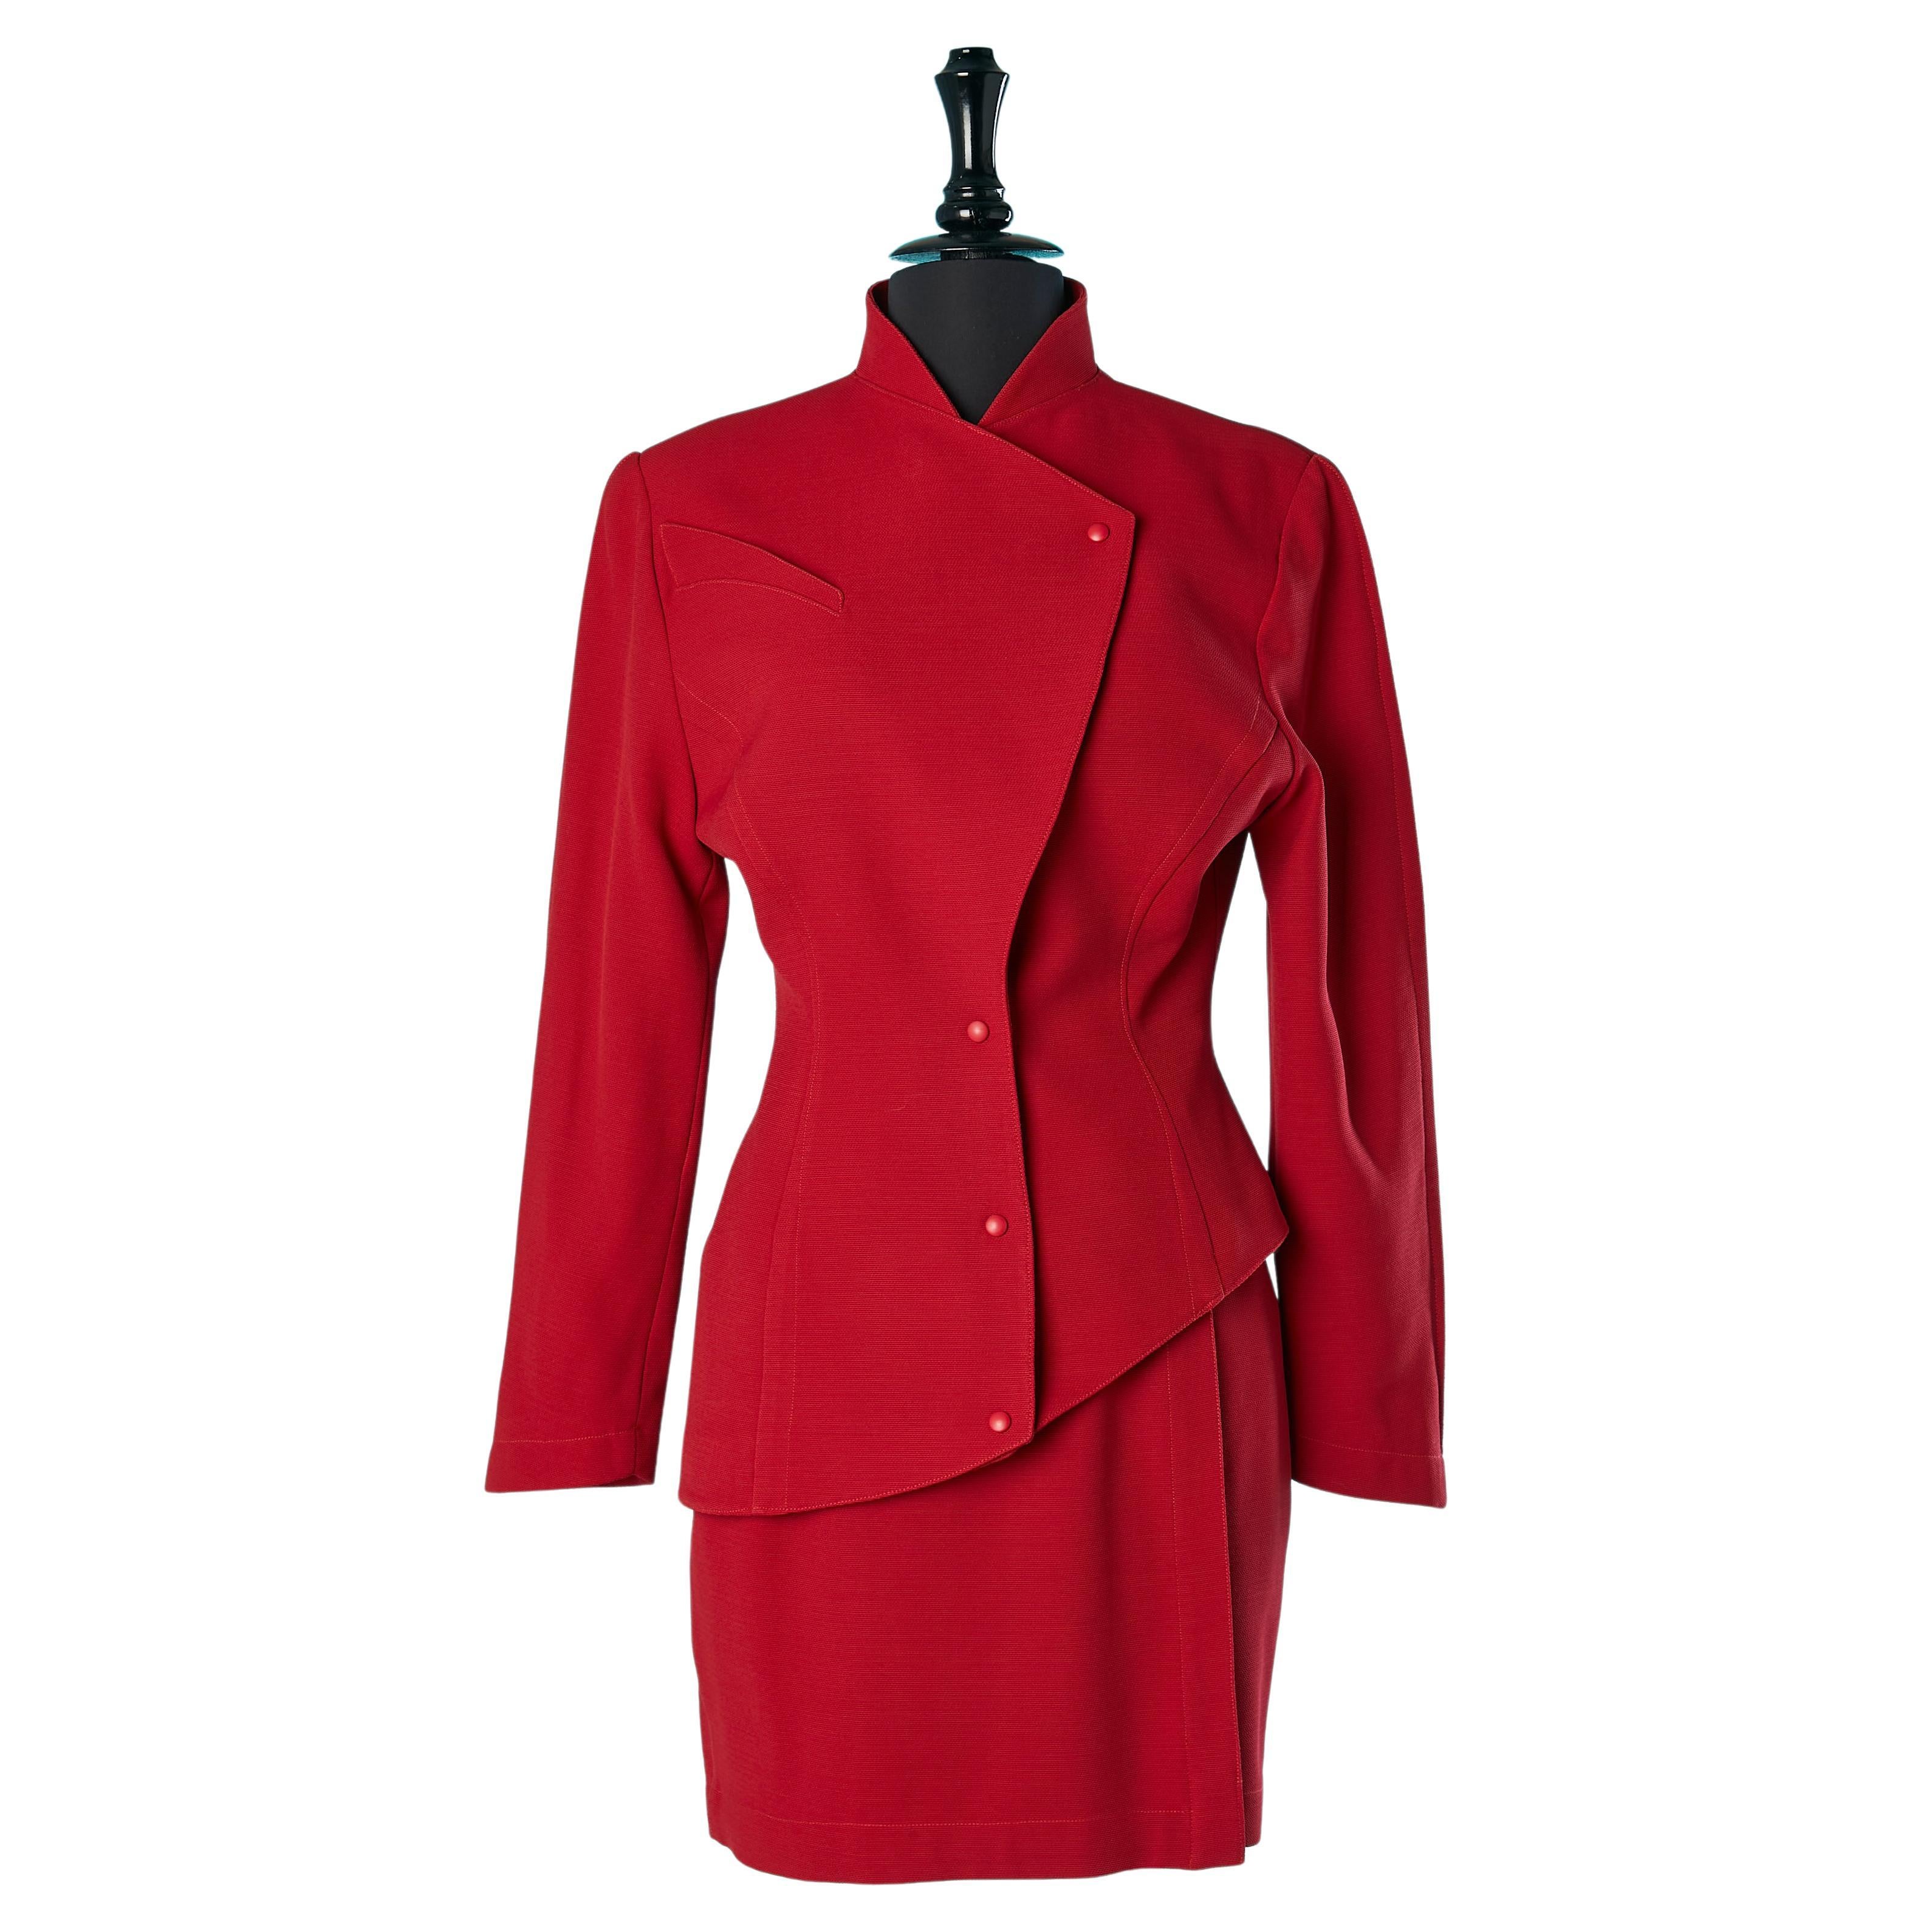 Red wool skirt-suit with asymmetrical jacket and wrap skirt Thierry Mugler 